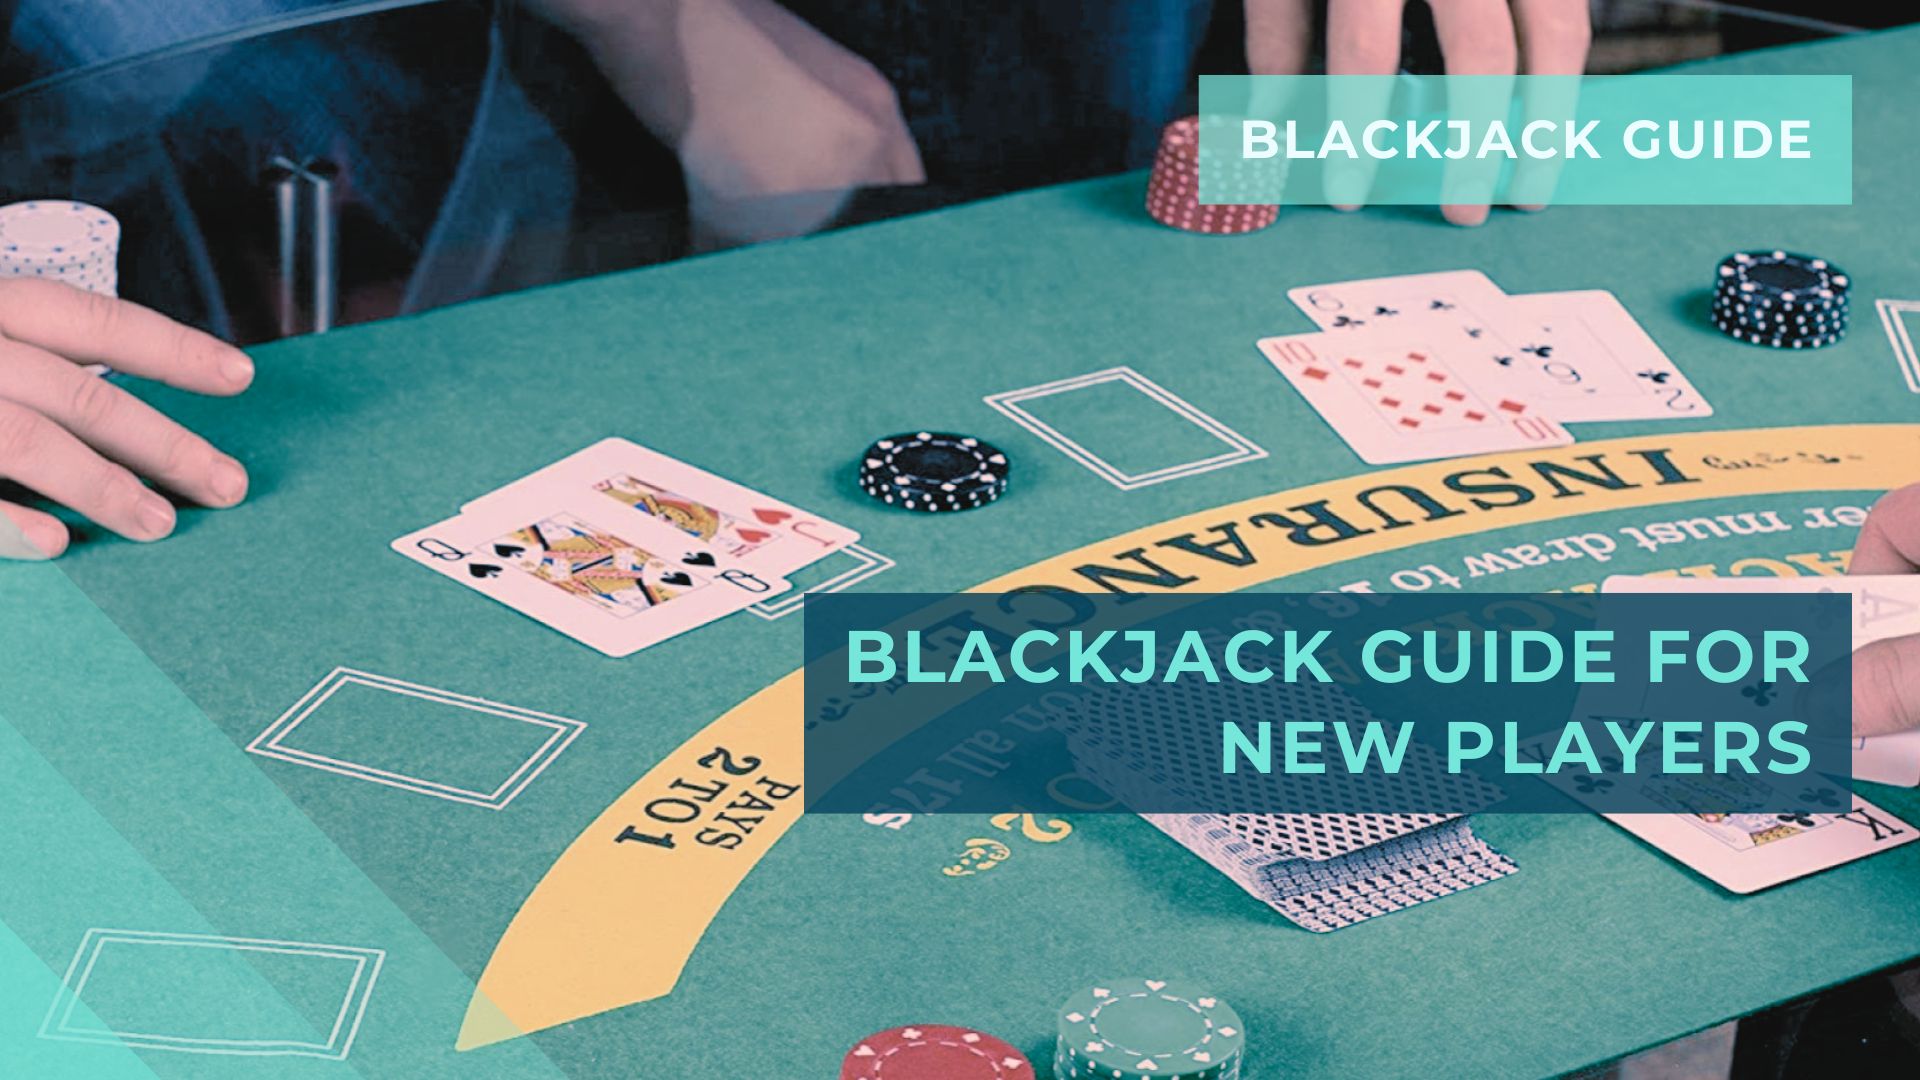 Blackjack guide for new players